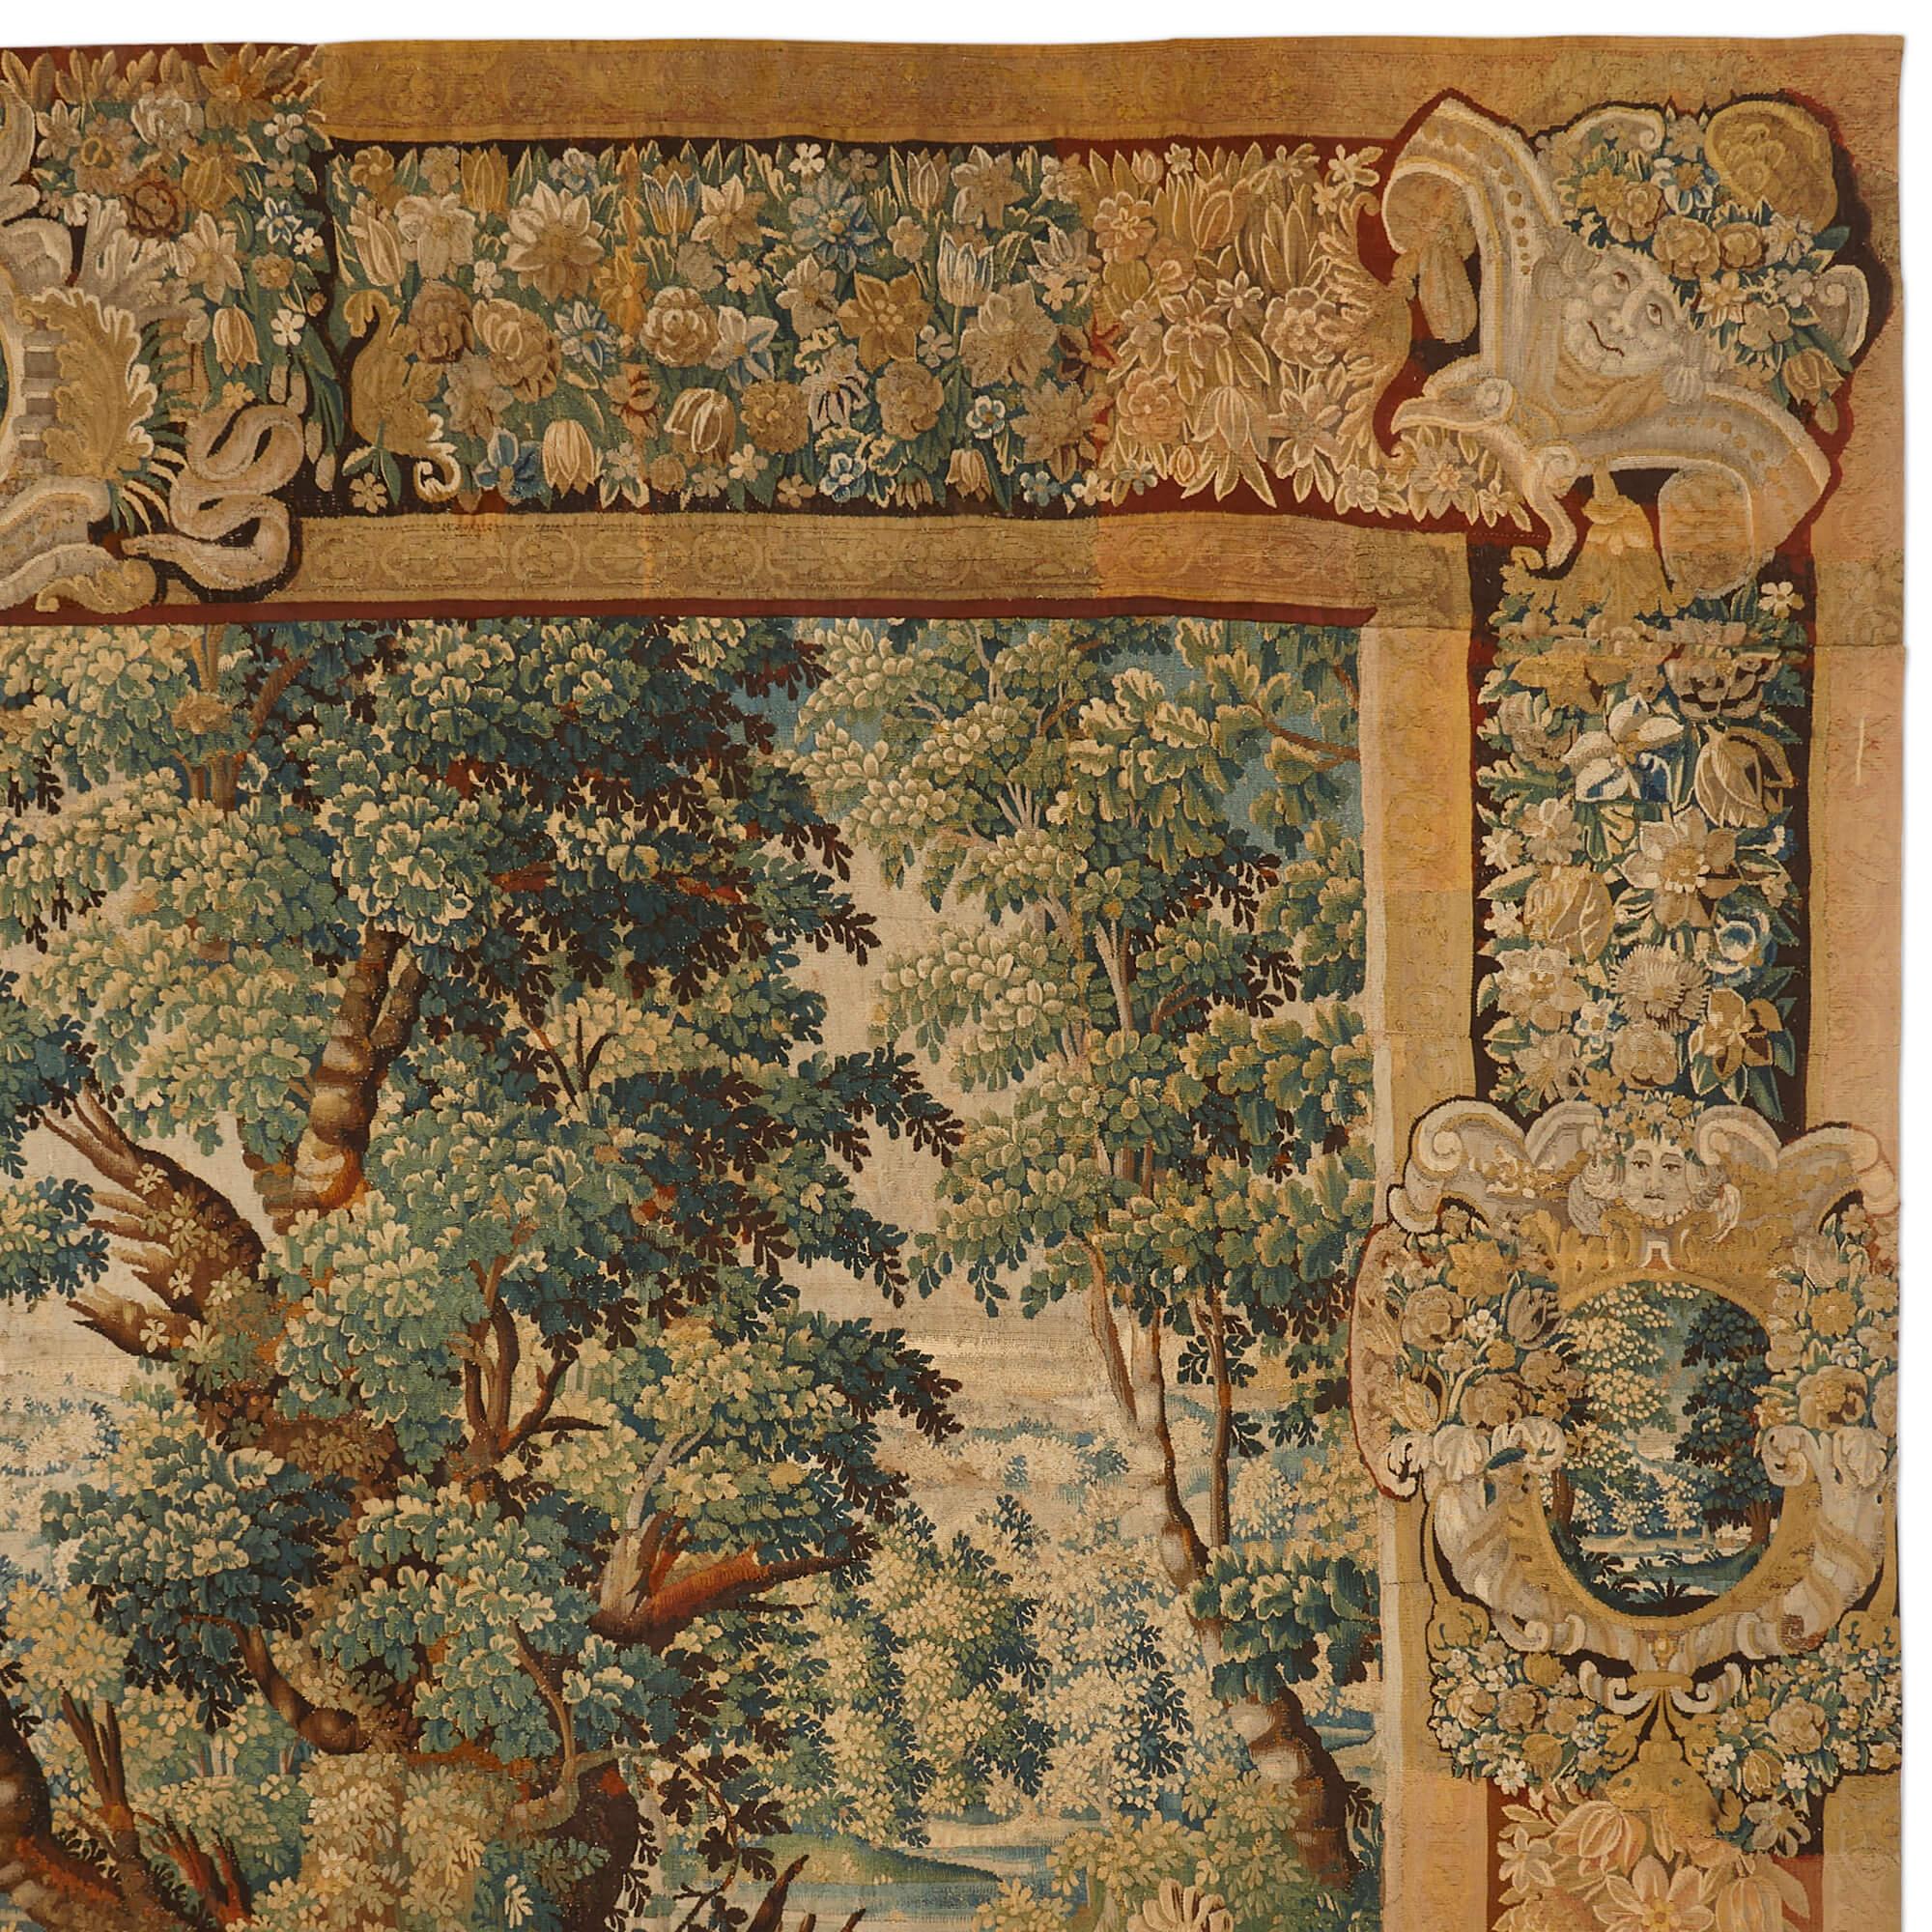 Immense 17th Century Flemish wool verdure tapestry
Flemish, 17th Century
Height 323cm, width 424cm

This very large and exquisite tapestry was crafted in wool in Flanders during the 17th Century, following the tradition of verdure tapestries. These